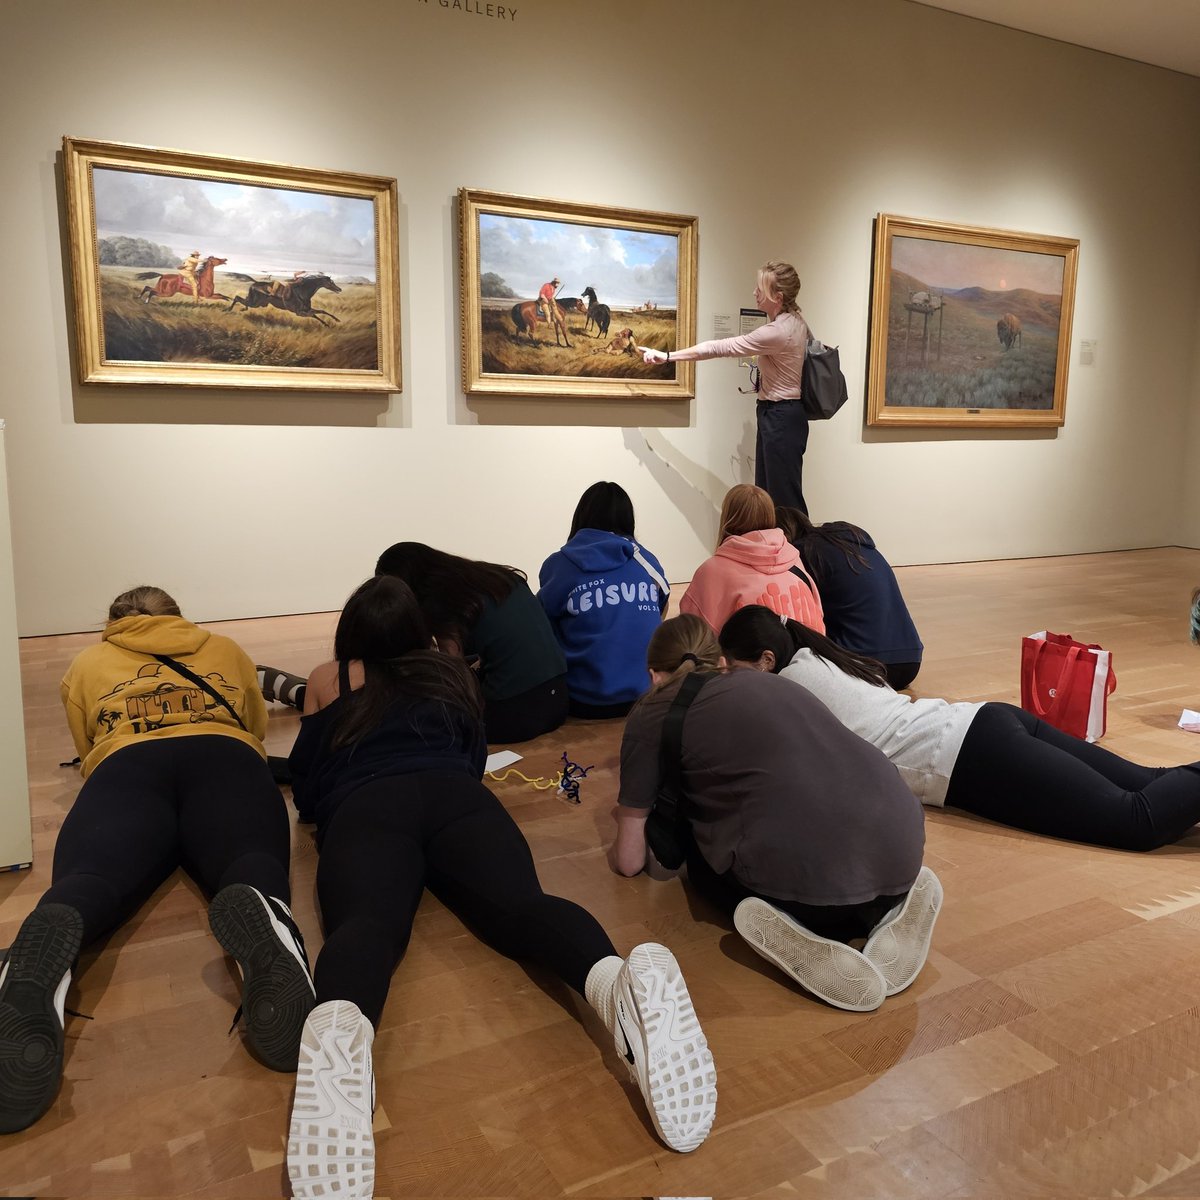 We had the most amazing docent /guide at the @MilwaukeeArt Muesem today - She got our students reflecting, writing haiku poems, and even making their own art. @PPMS_SDE #theartofwriting #werppms